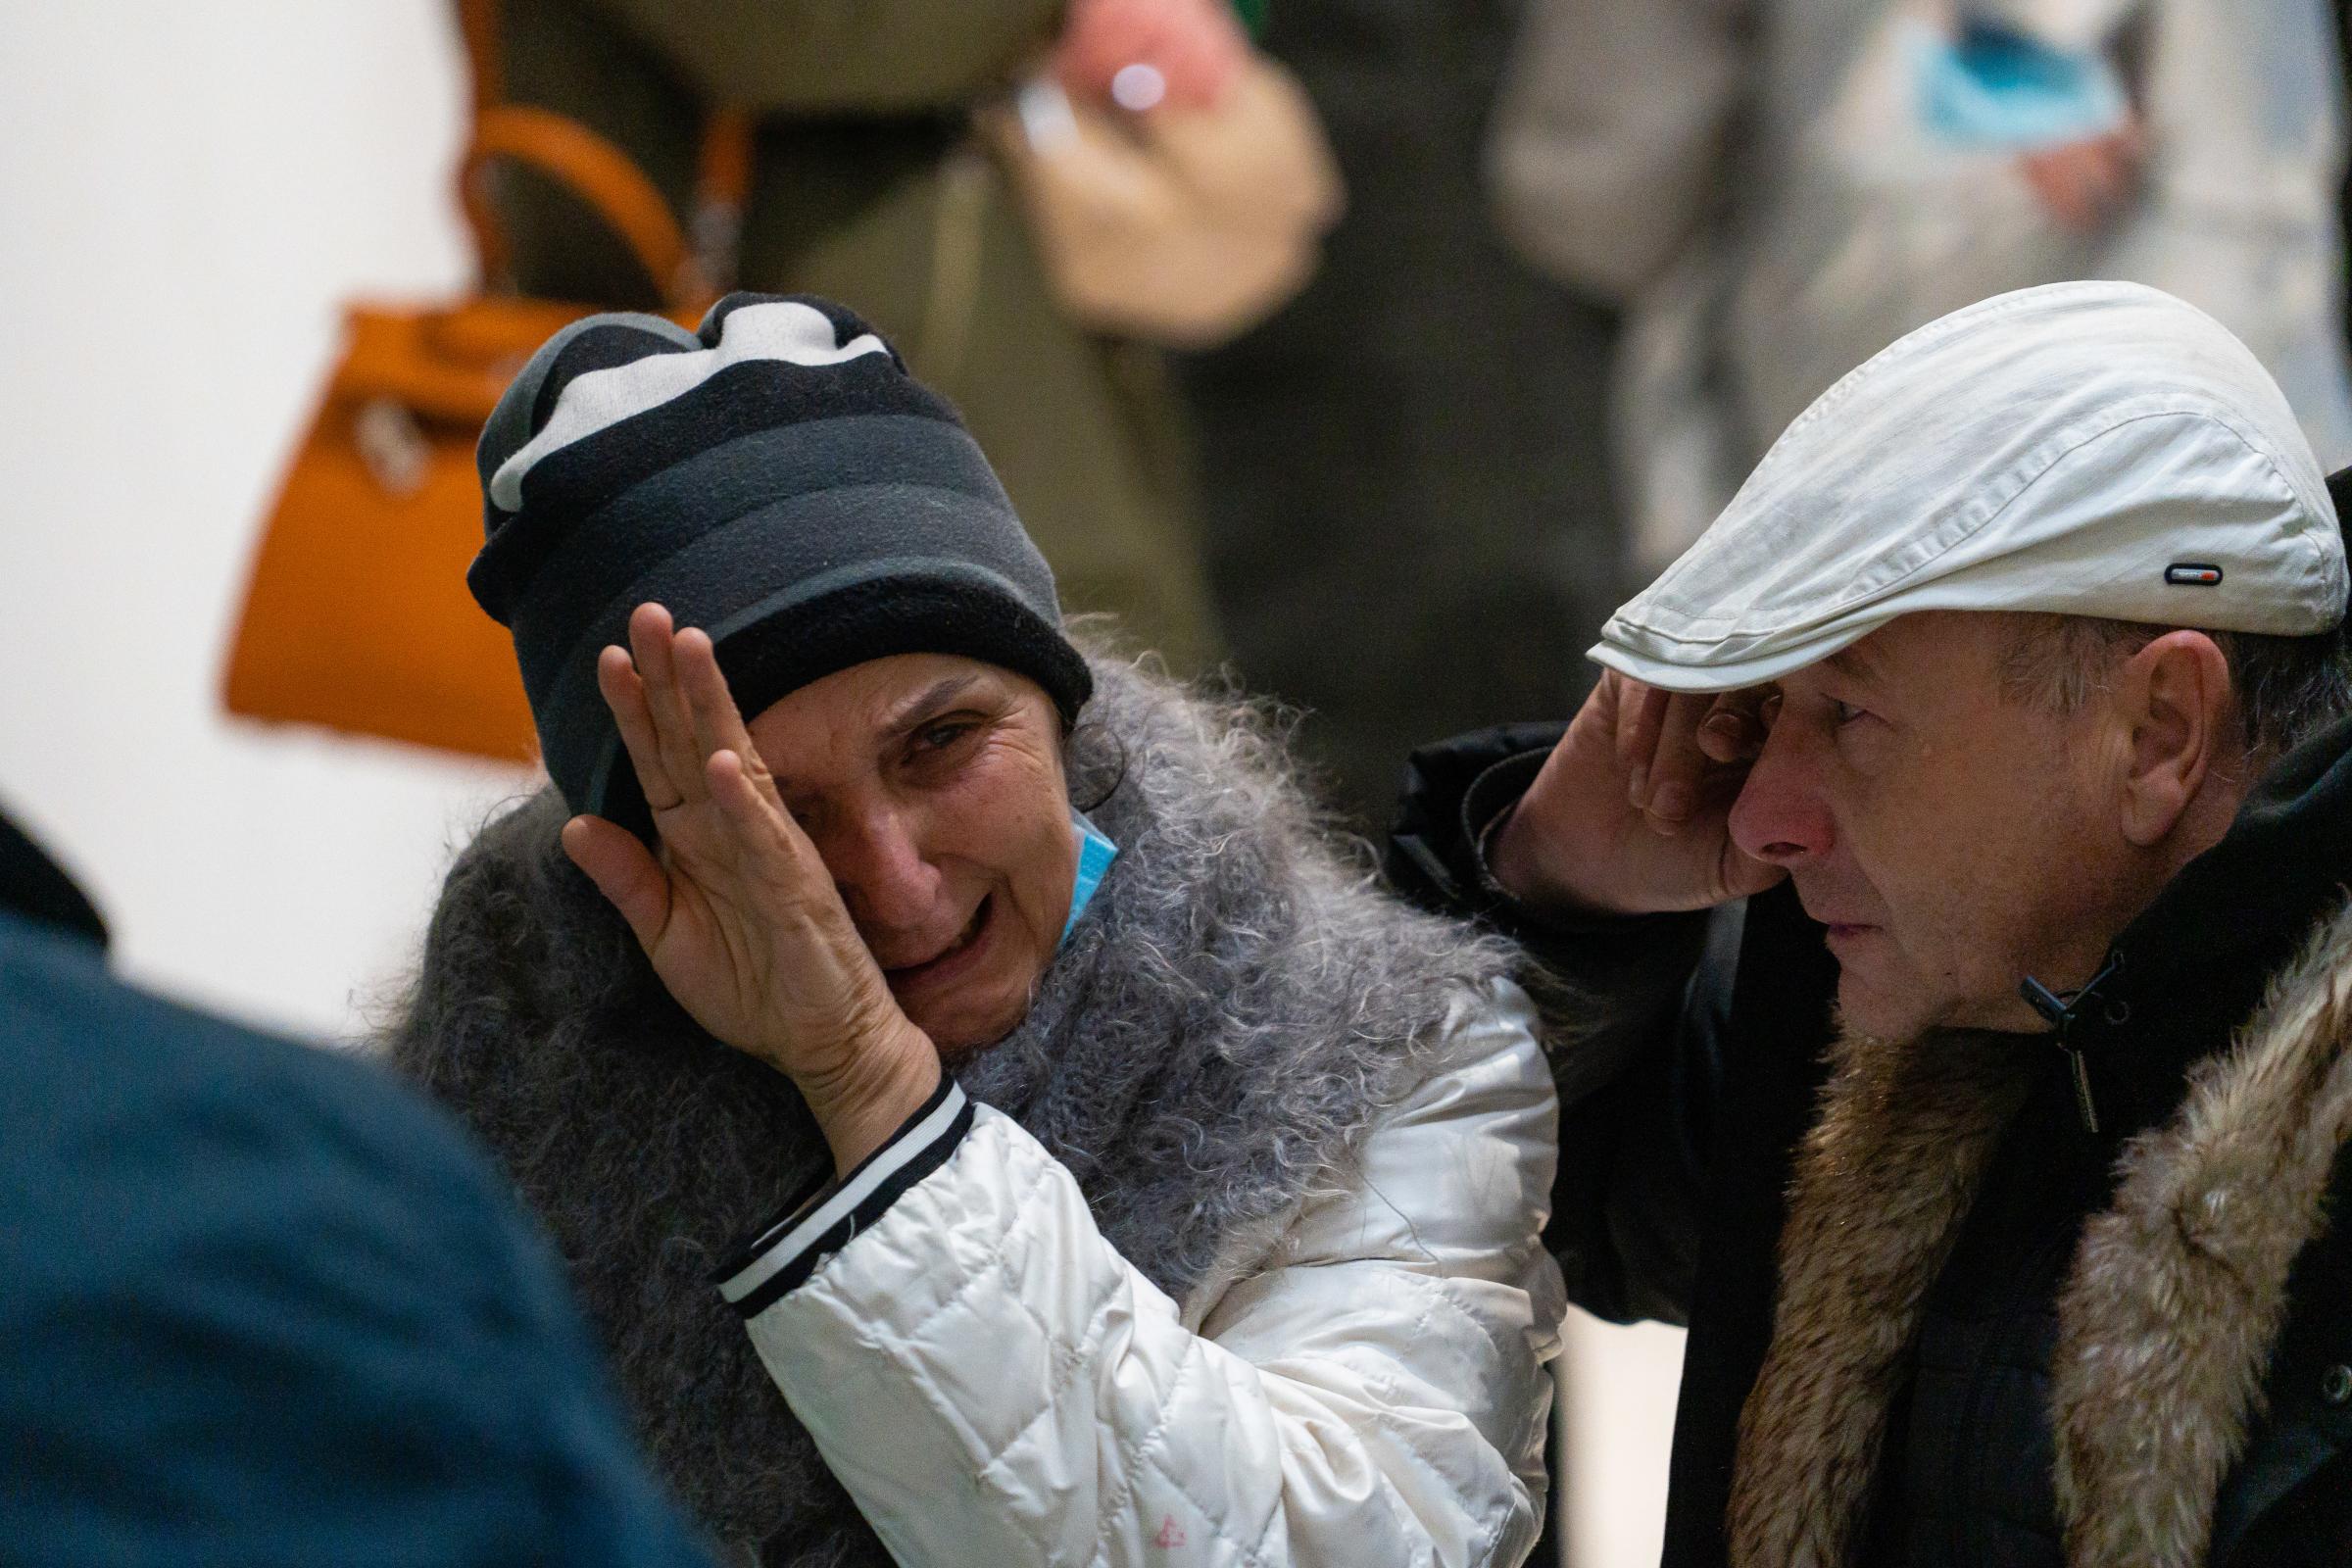 At the refugee reception centre in Przemysl an elderly Ukrainian woman is overcome with emotion and anger as she shouts Putin! Putin! Putin! through her tears. Picture: Ronan McGrade